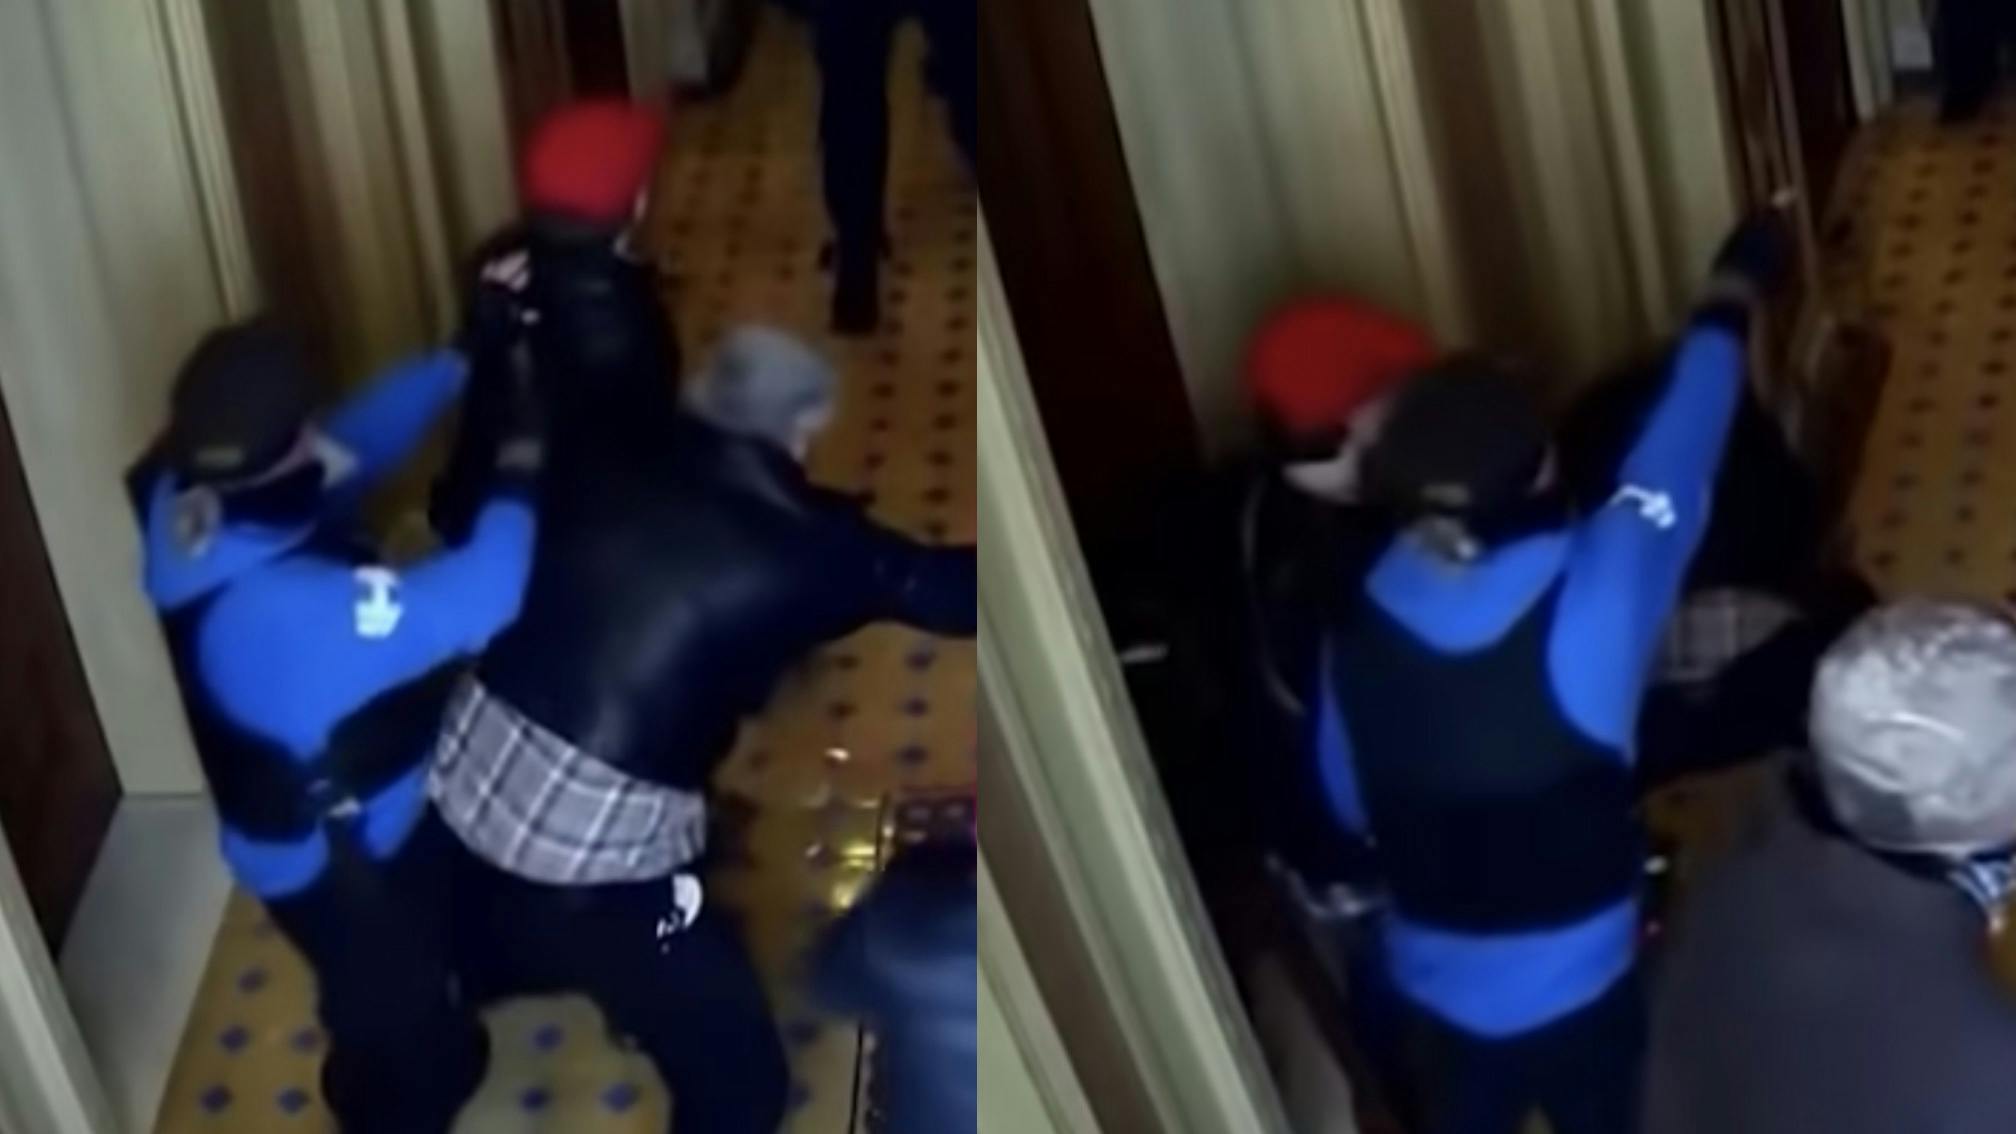 Newly released footage seems to show Jon Schaffer charging at officers in Capitol Building